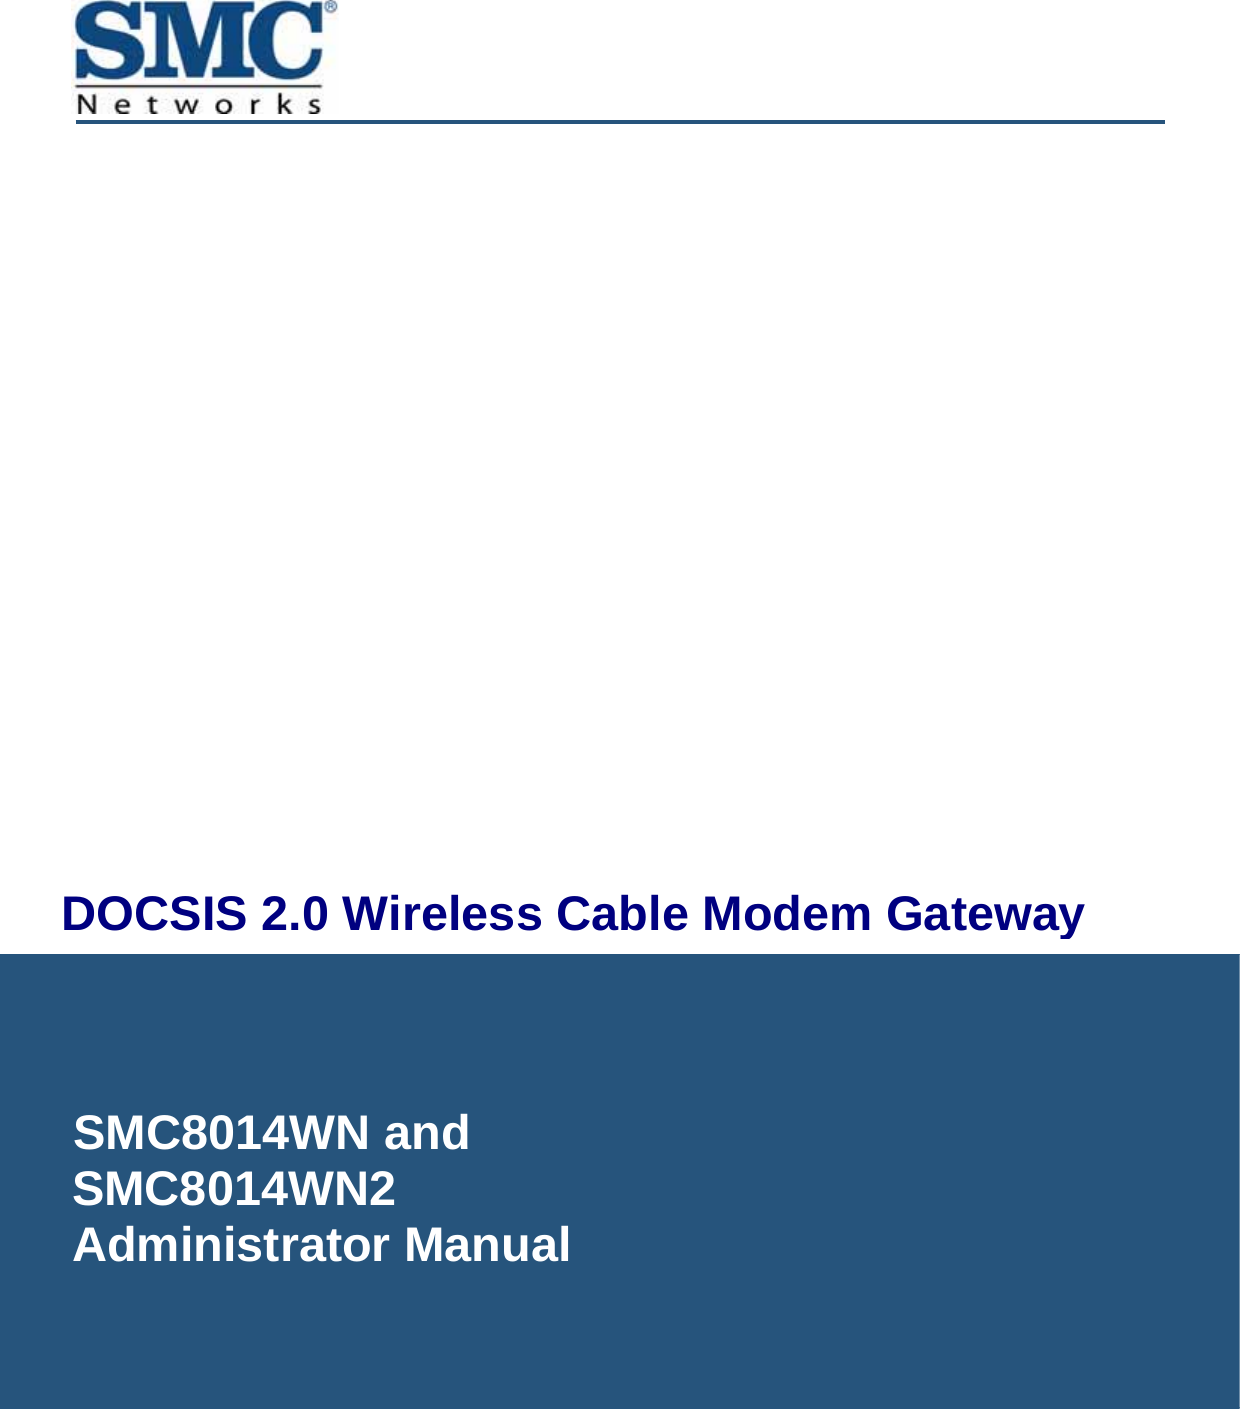          DOCSIS 2.0 Wireless Cable Modem GatewayFastFind Links  Getting to Know the Gateway Installing the Gateway Configuring Your Computer for TCP/IP Configuring the Gateway  SMC8014WN and  SMC8014WN2   Administrator Manual 